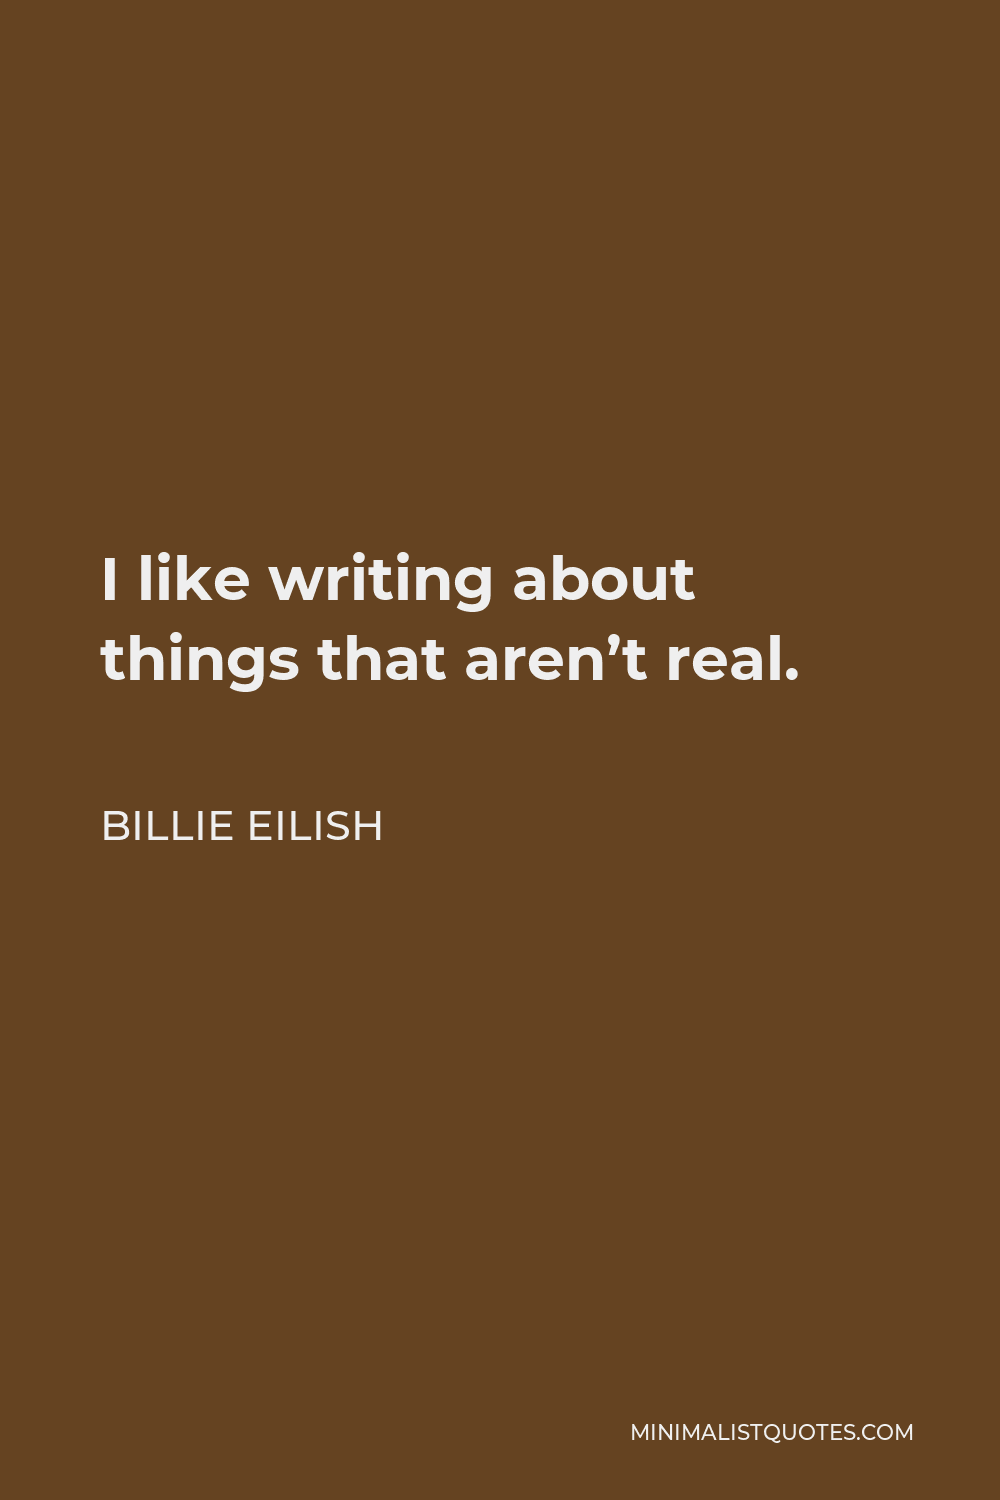 Billie Eilish Quote - I like writing about things that aren’t real.